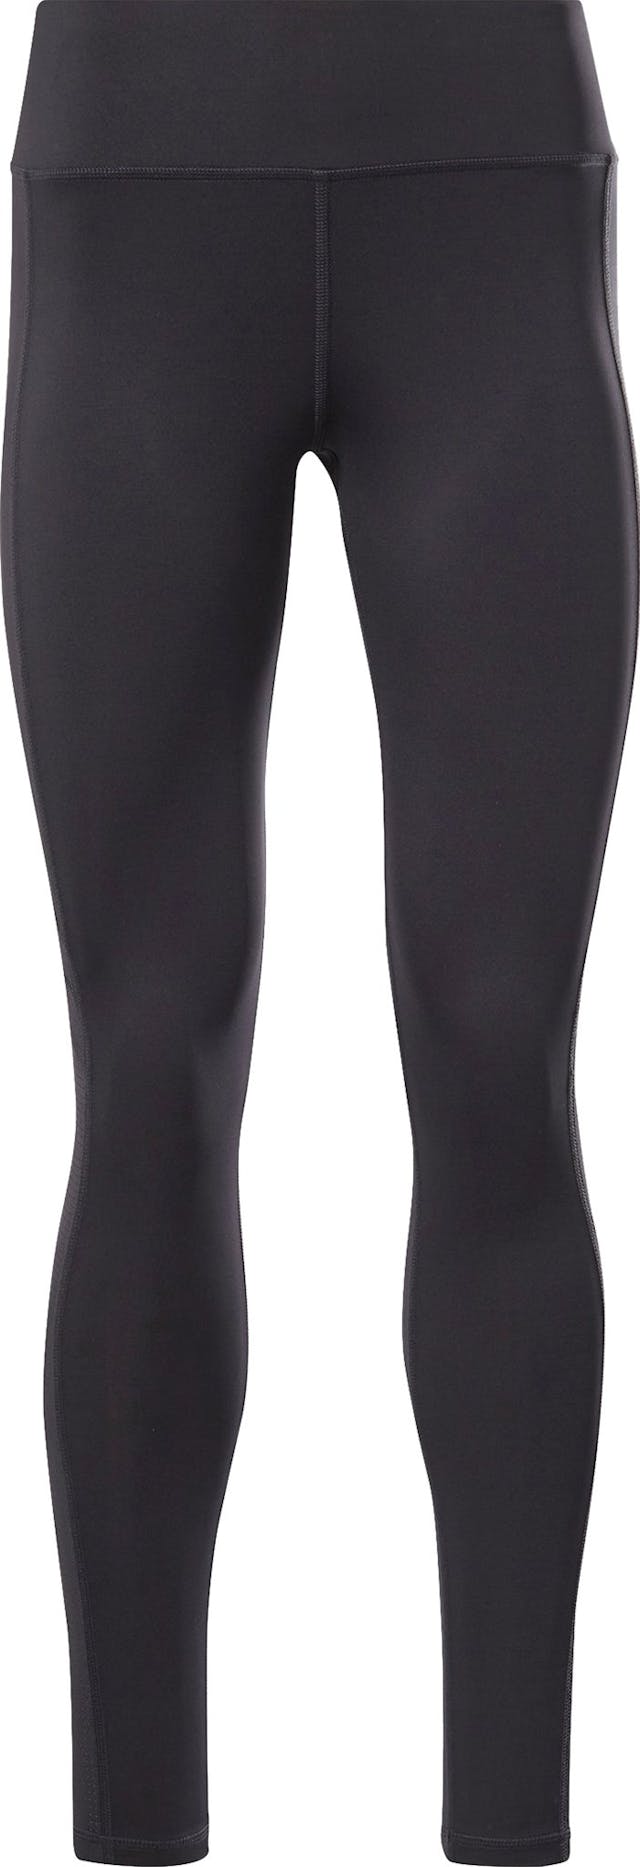 Product image for Workout Ready Mesh Training Tights - Women's